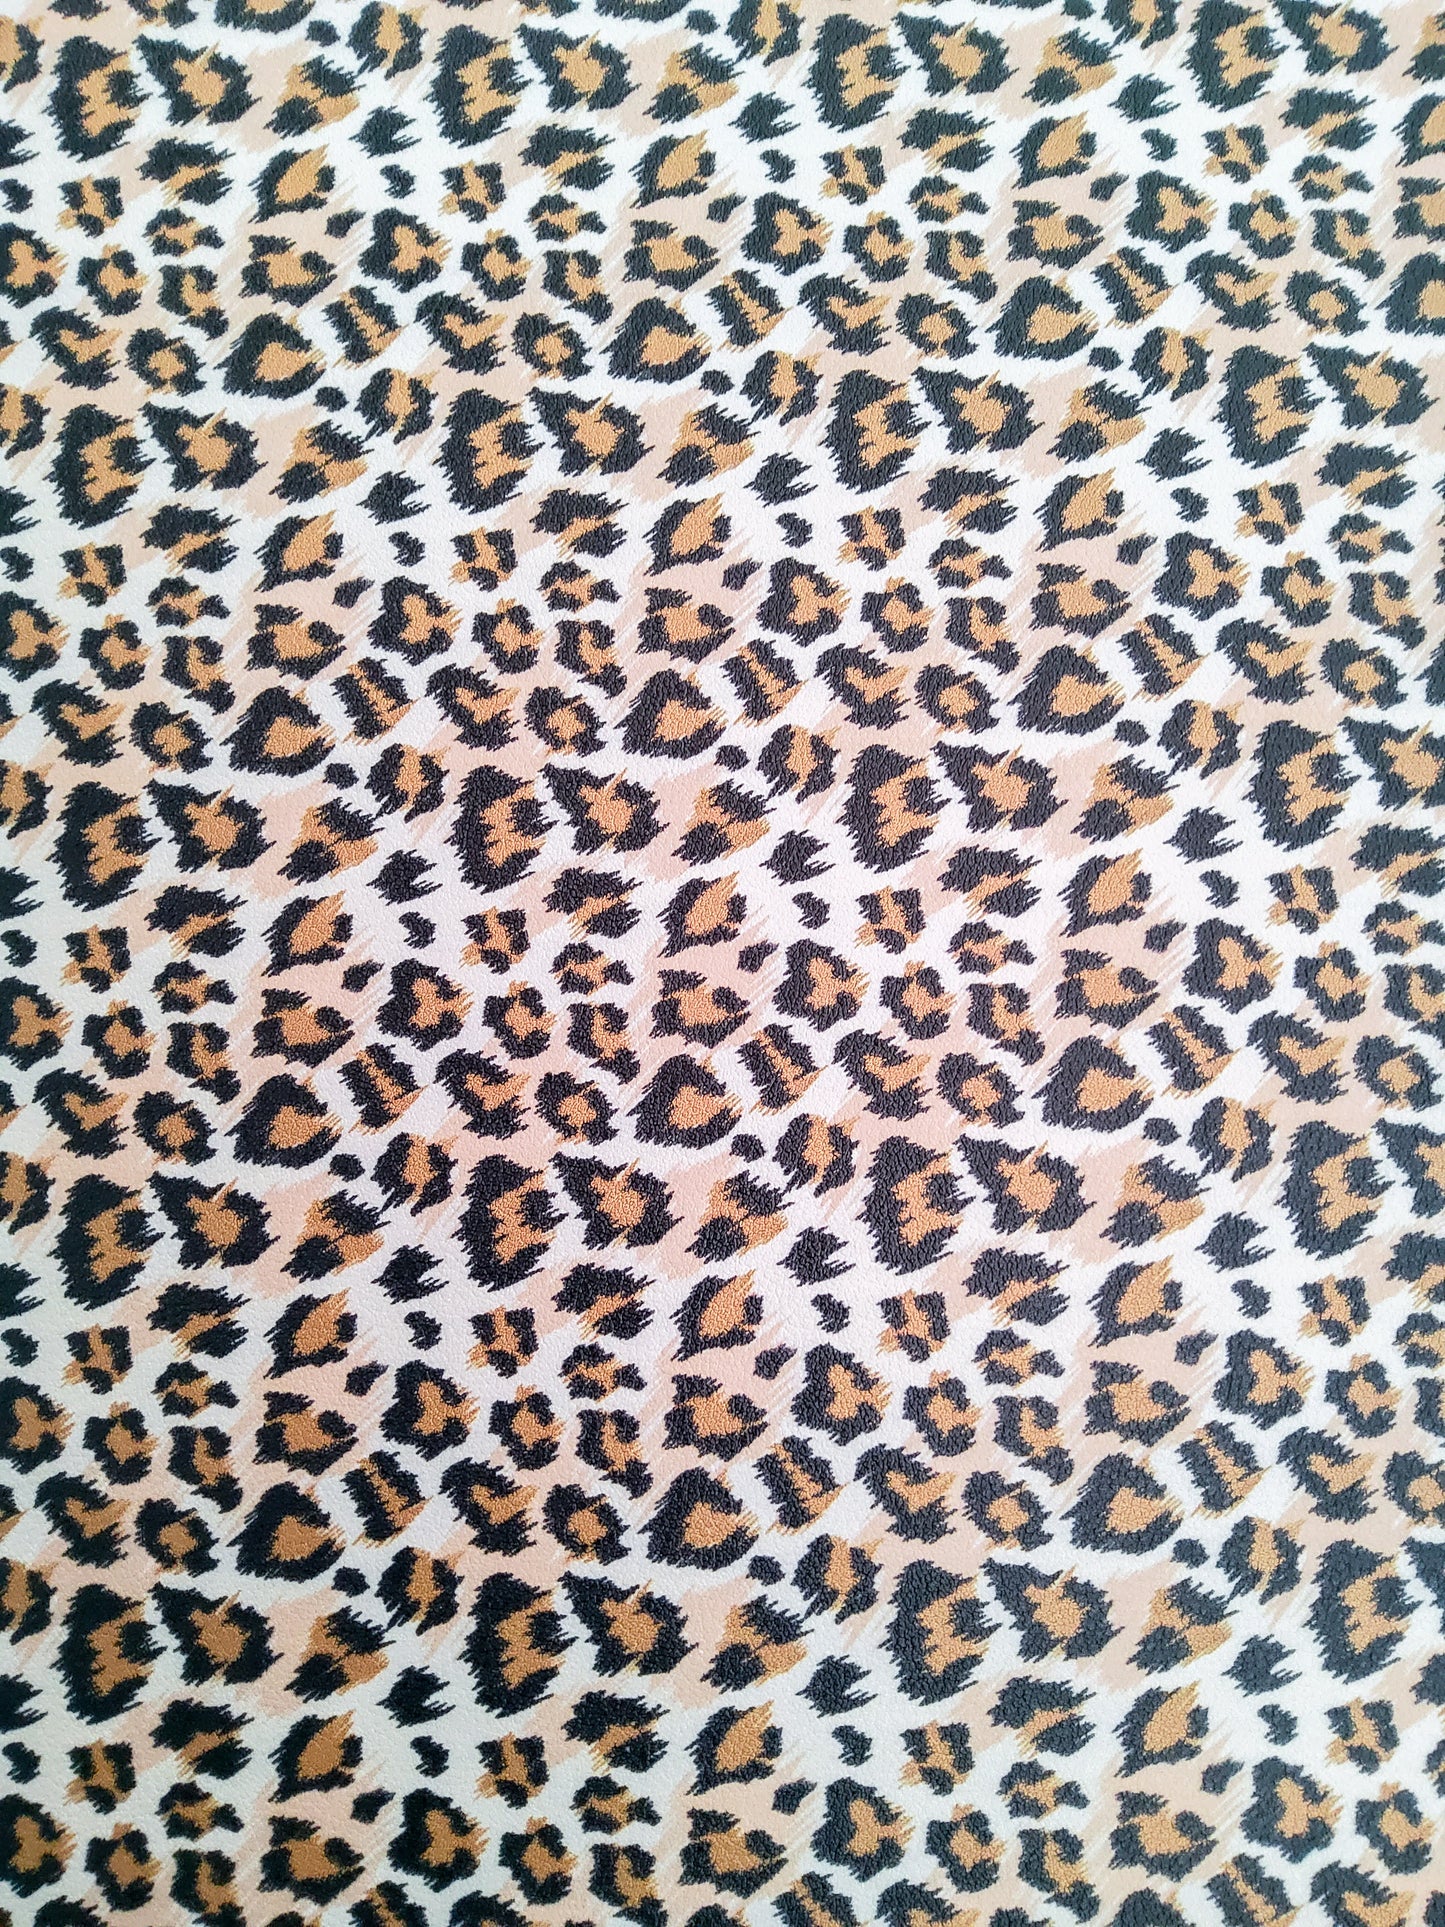 Leopard Print Real 9x12 faux leather sheet